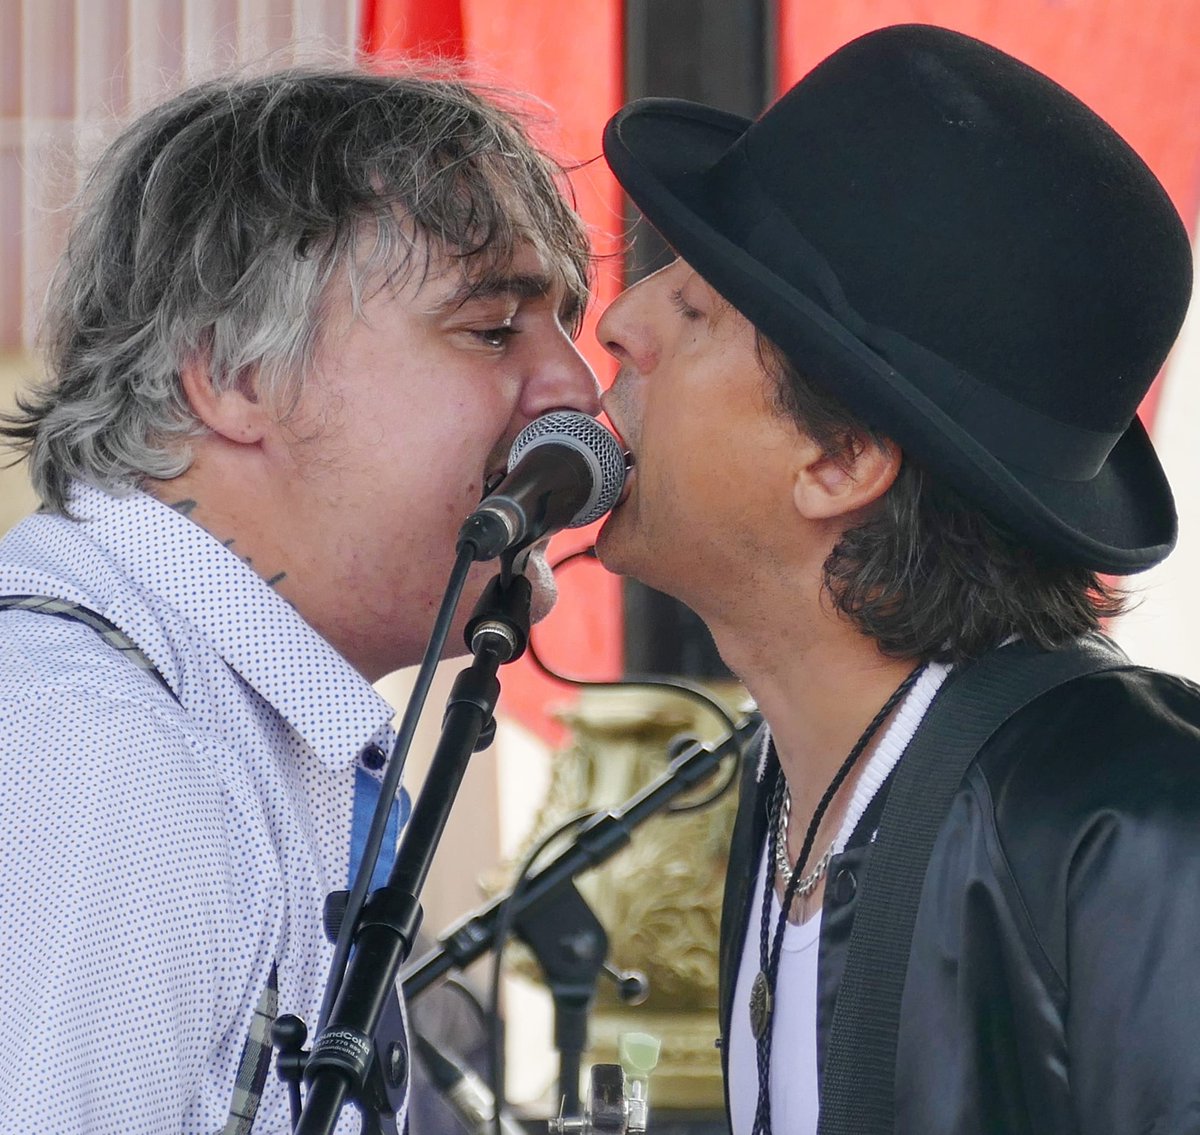 The Libertines at the Oval Bandstand Cliftonville today was a huge success. #libertines #welldone #petedoherty #carlbarat